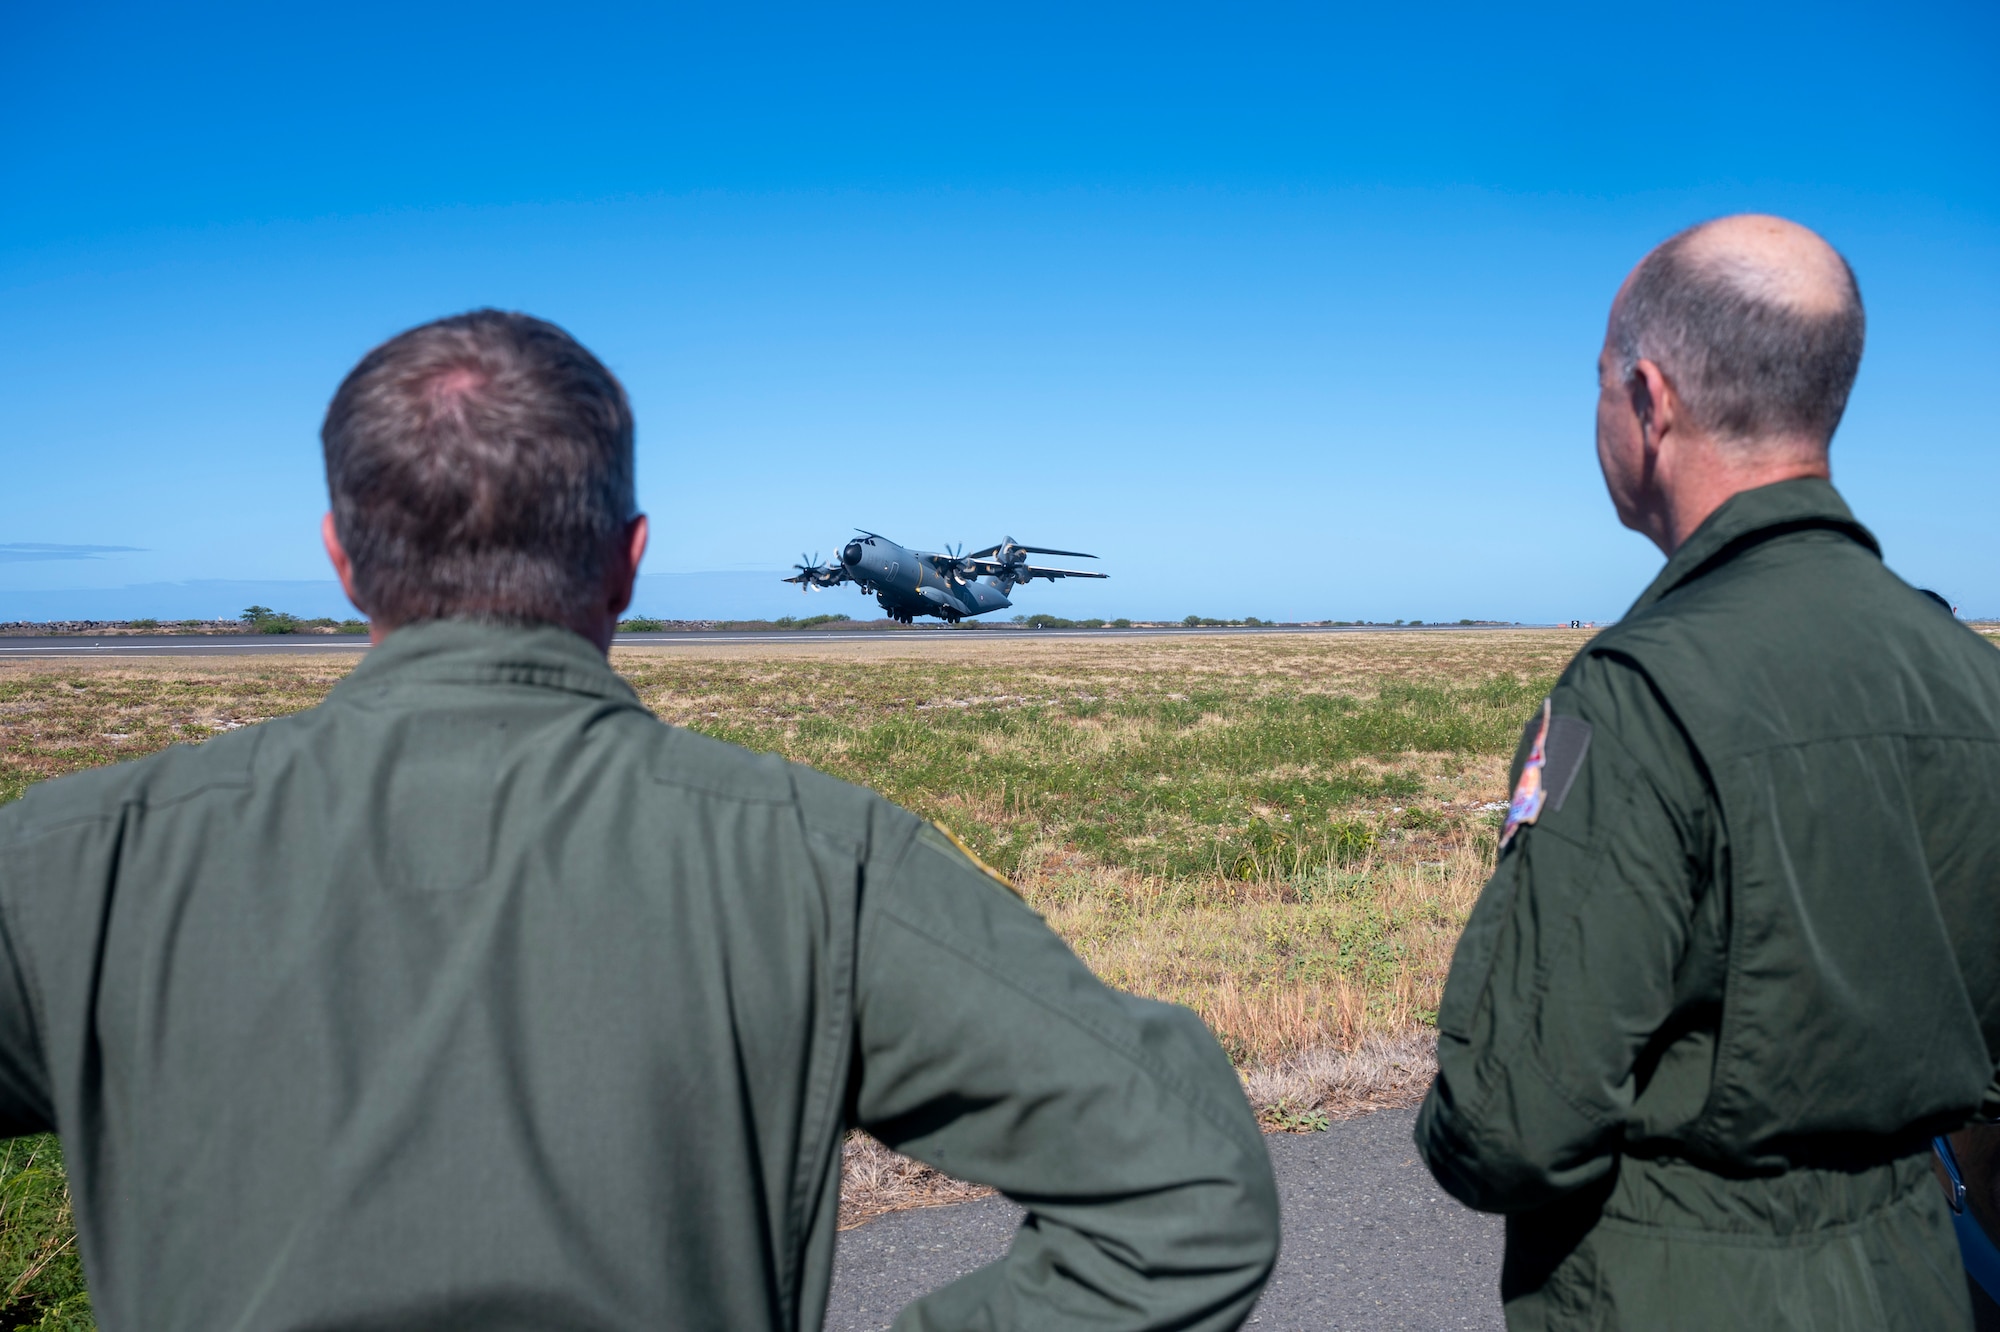 Brig. Gen. Dann S. Carlson, 154th Wing commander, Hawaii Air National Guard and Lt. Gen. Vincent Cousin, commander, Air Defence and Operations Command - French Air and Space Force, observe an A400M Atlas take-off at Honolulu International Airport, Hawaii, June 29, 2021.